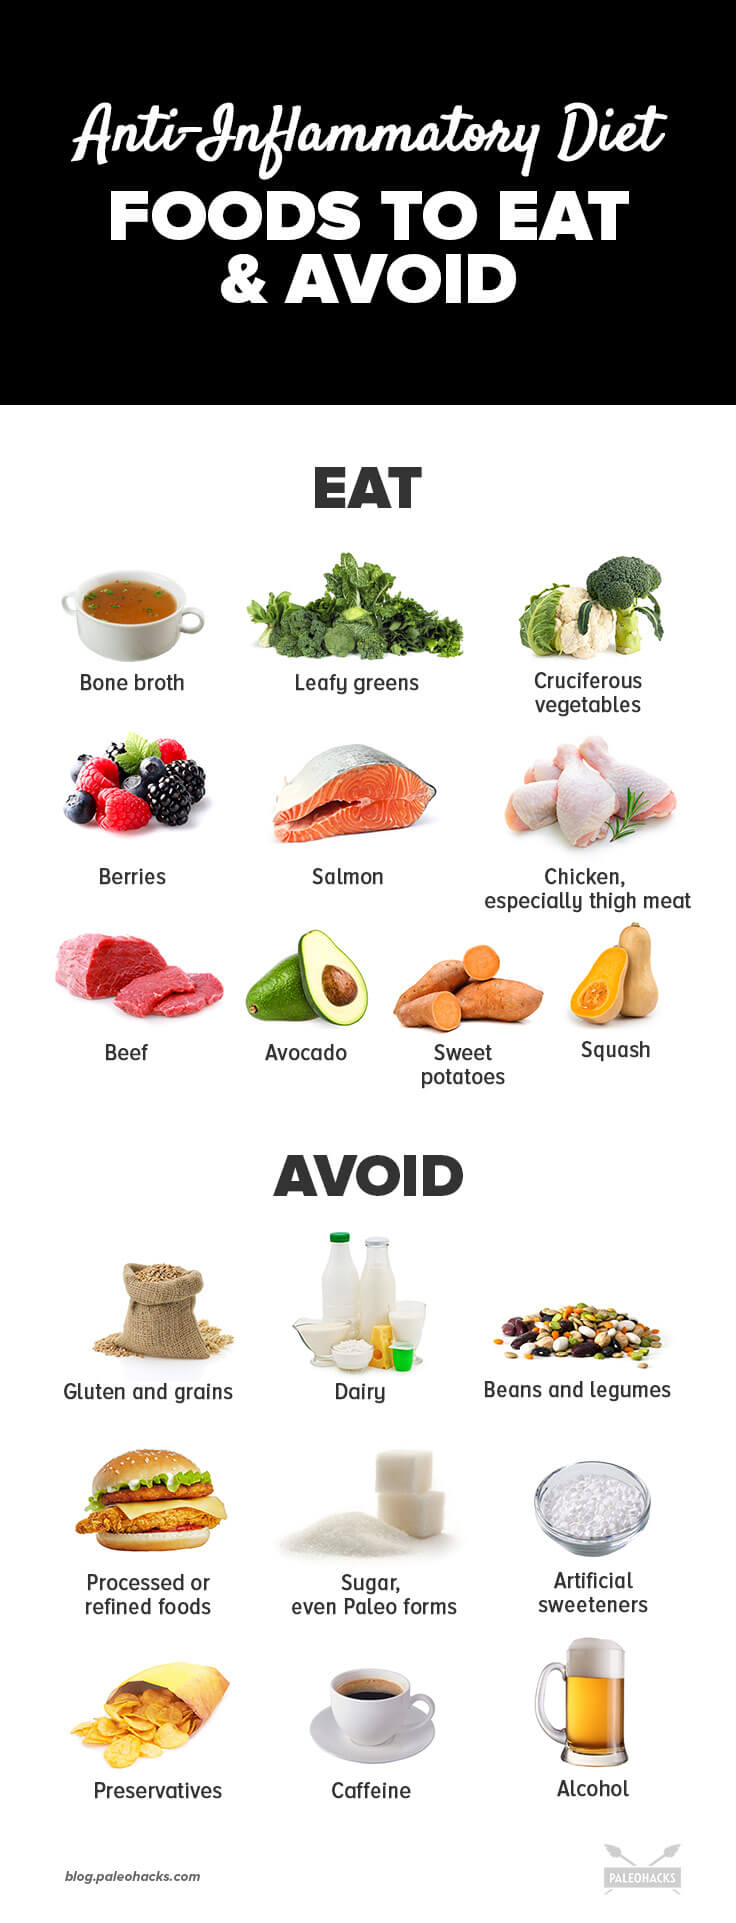 Foods for Anti Inflammatory Diet